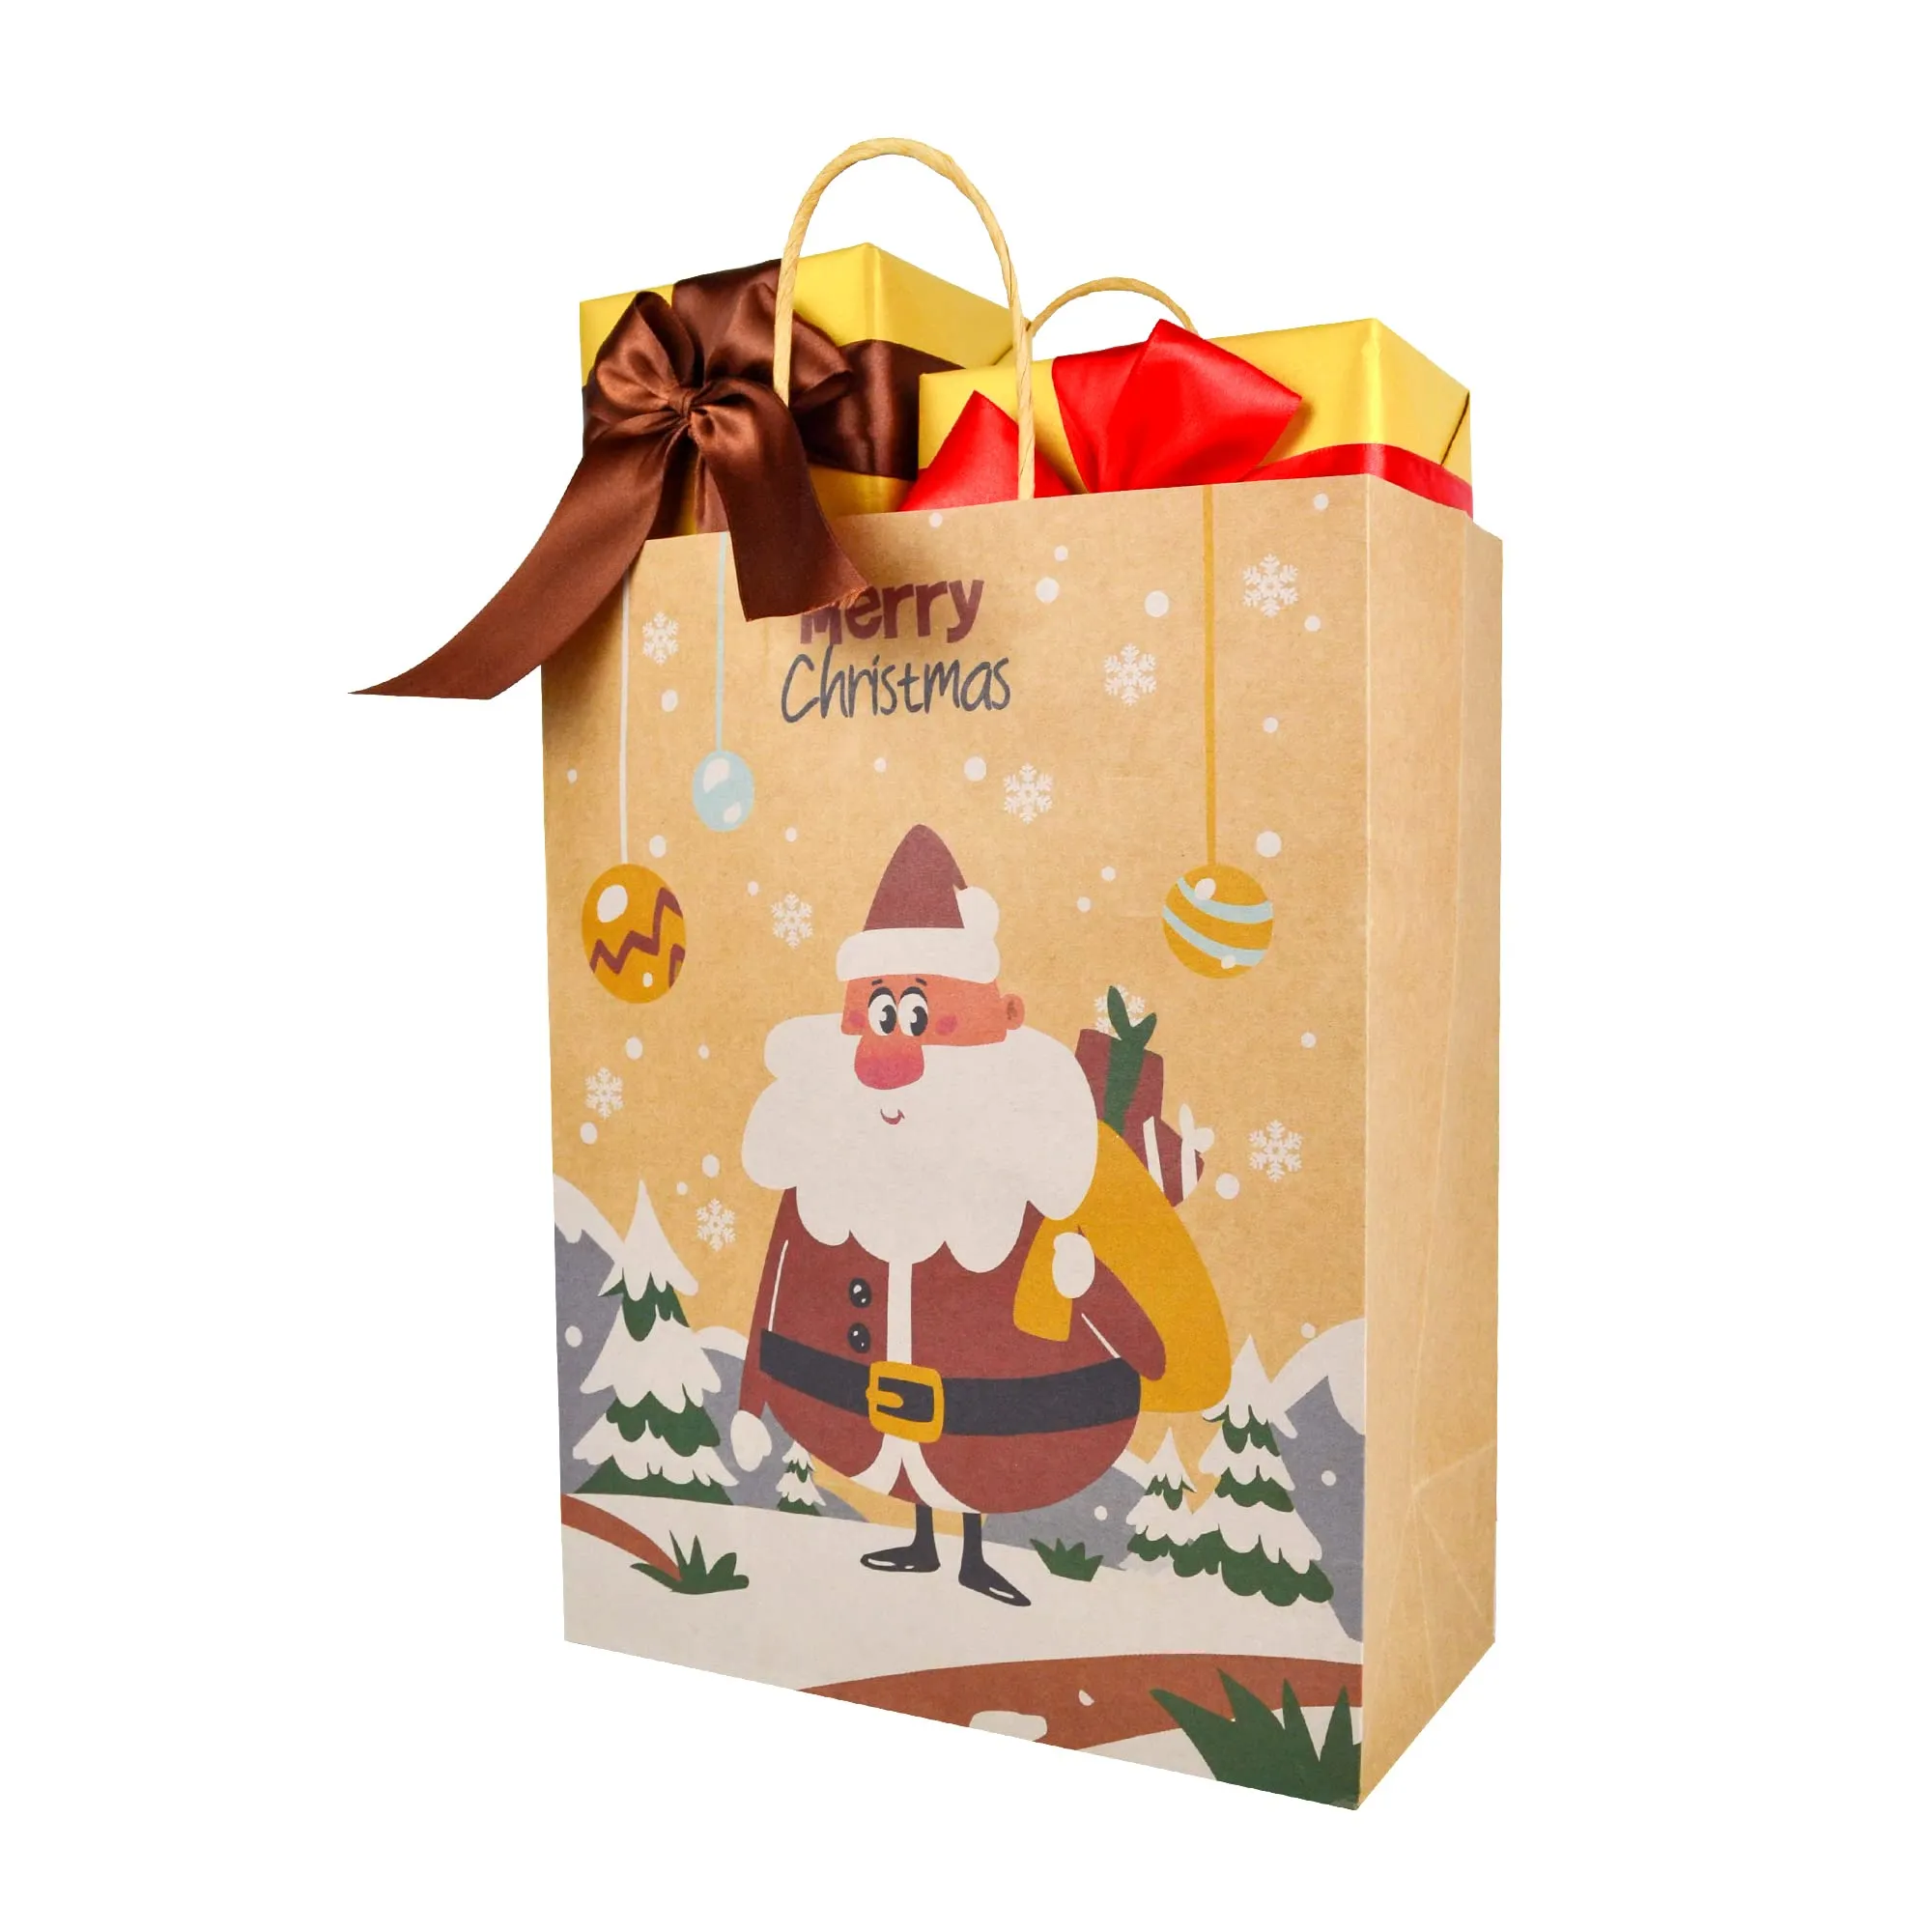 ORNACELE 12PCS Christmas Gift Bags 12PCS Assorted Styles Bags Xmas Small  Kraft Paper Bags with Handles Christmas Goodie Bags with Christmas Prints  for